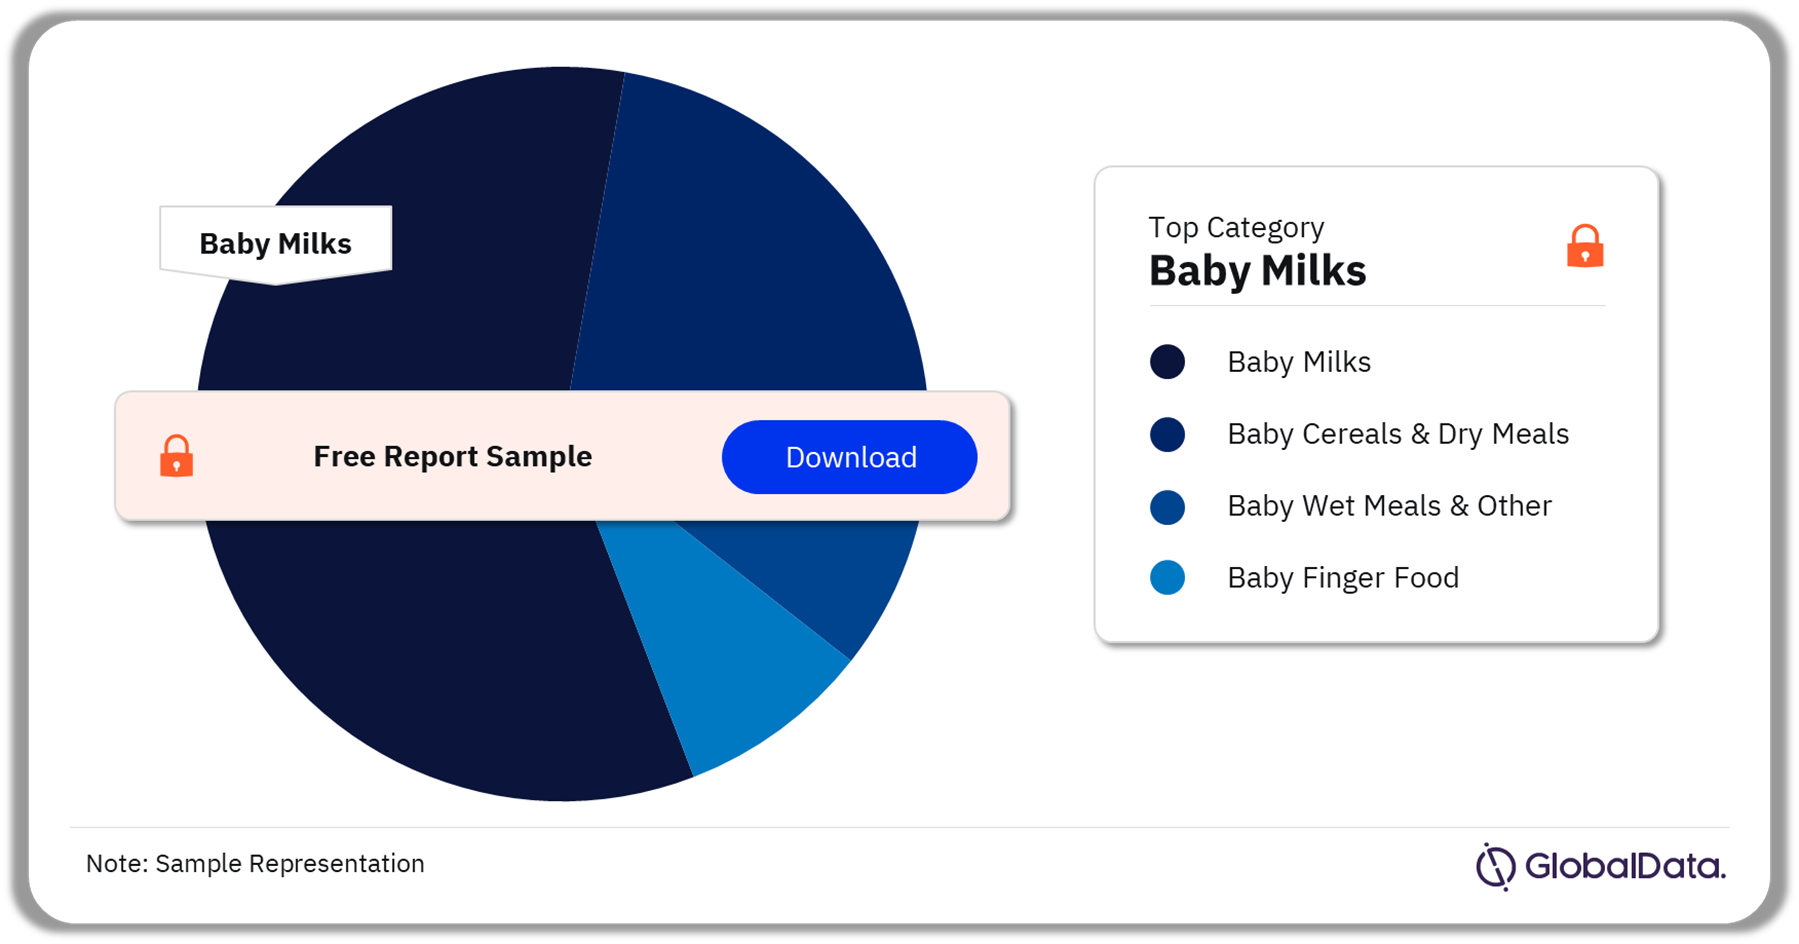 The baby milk category garnered the highest baby food sales in 2022